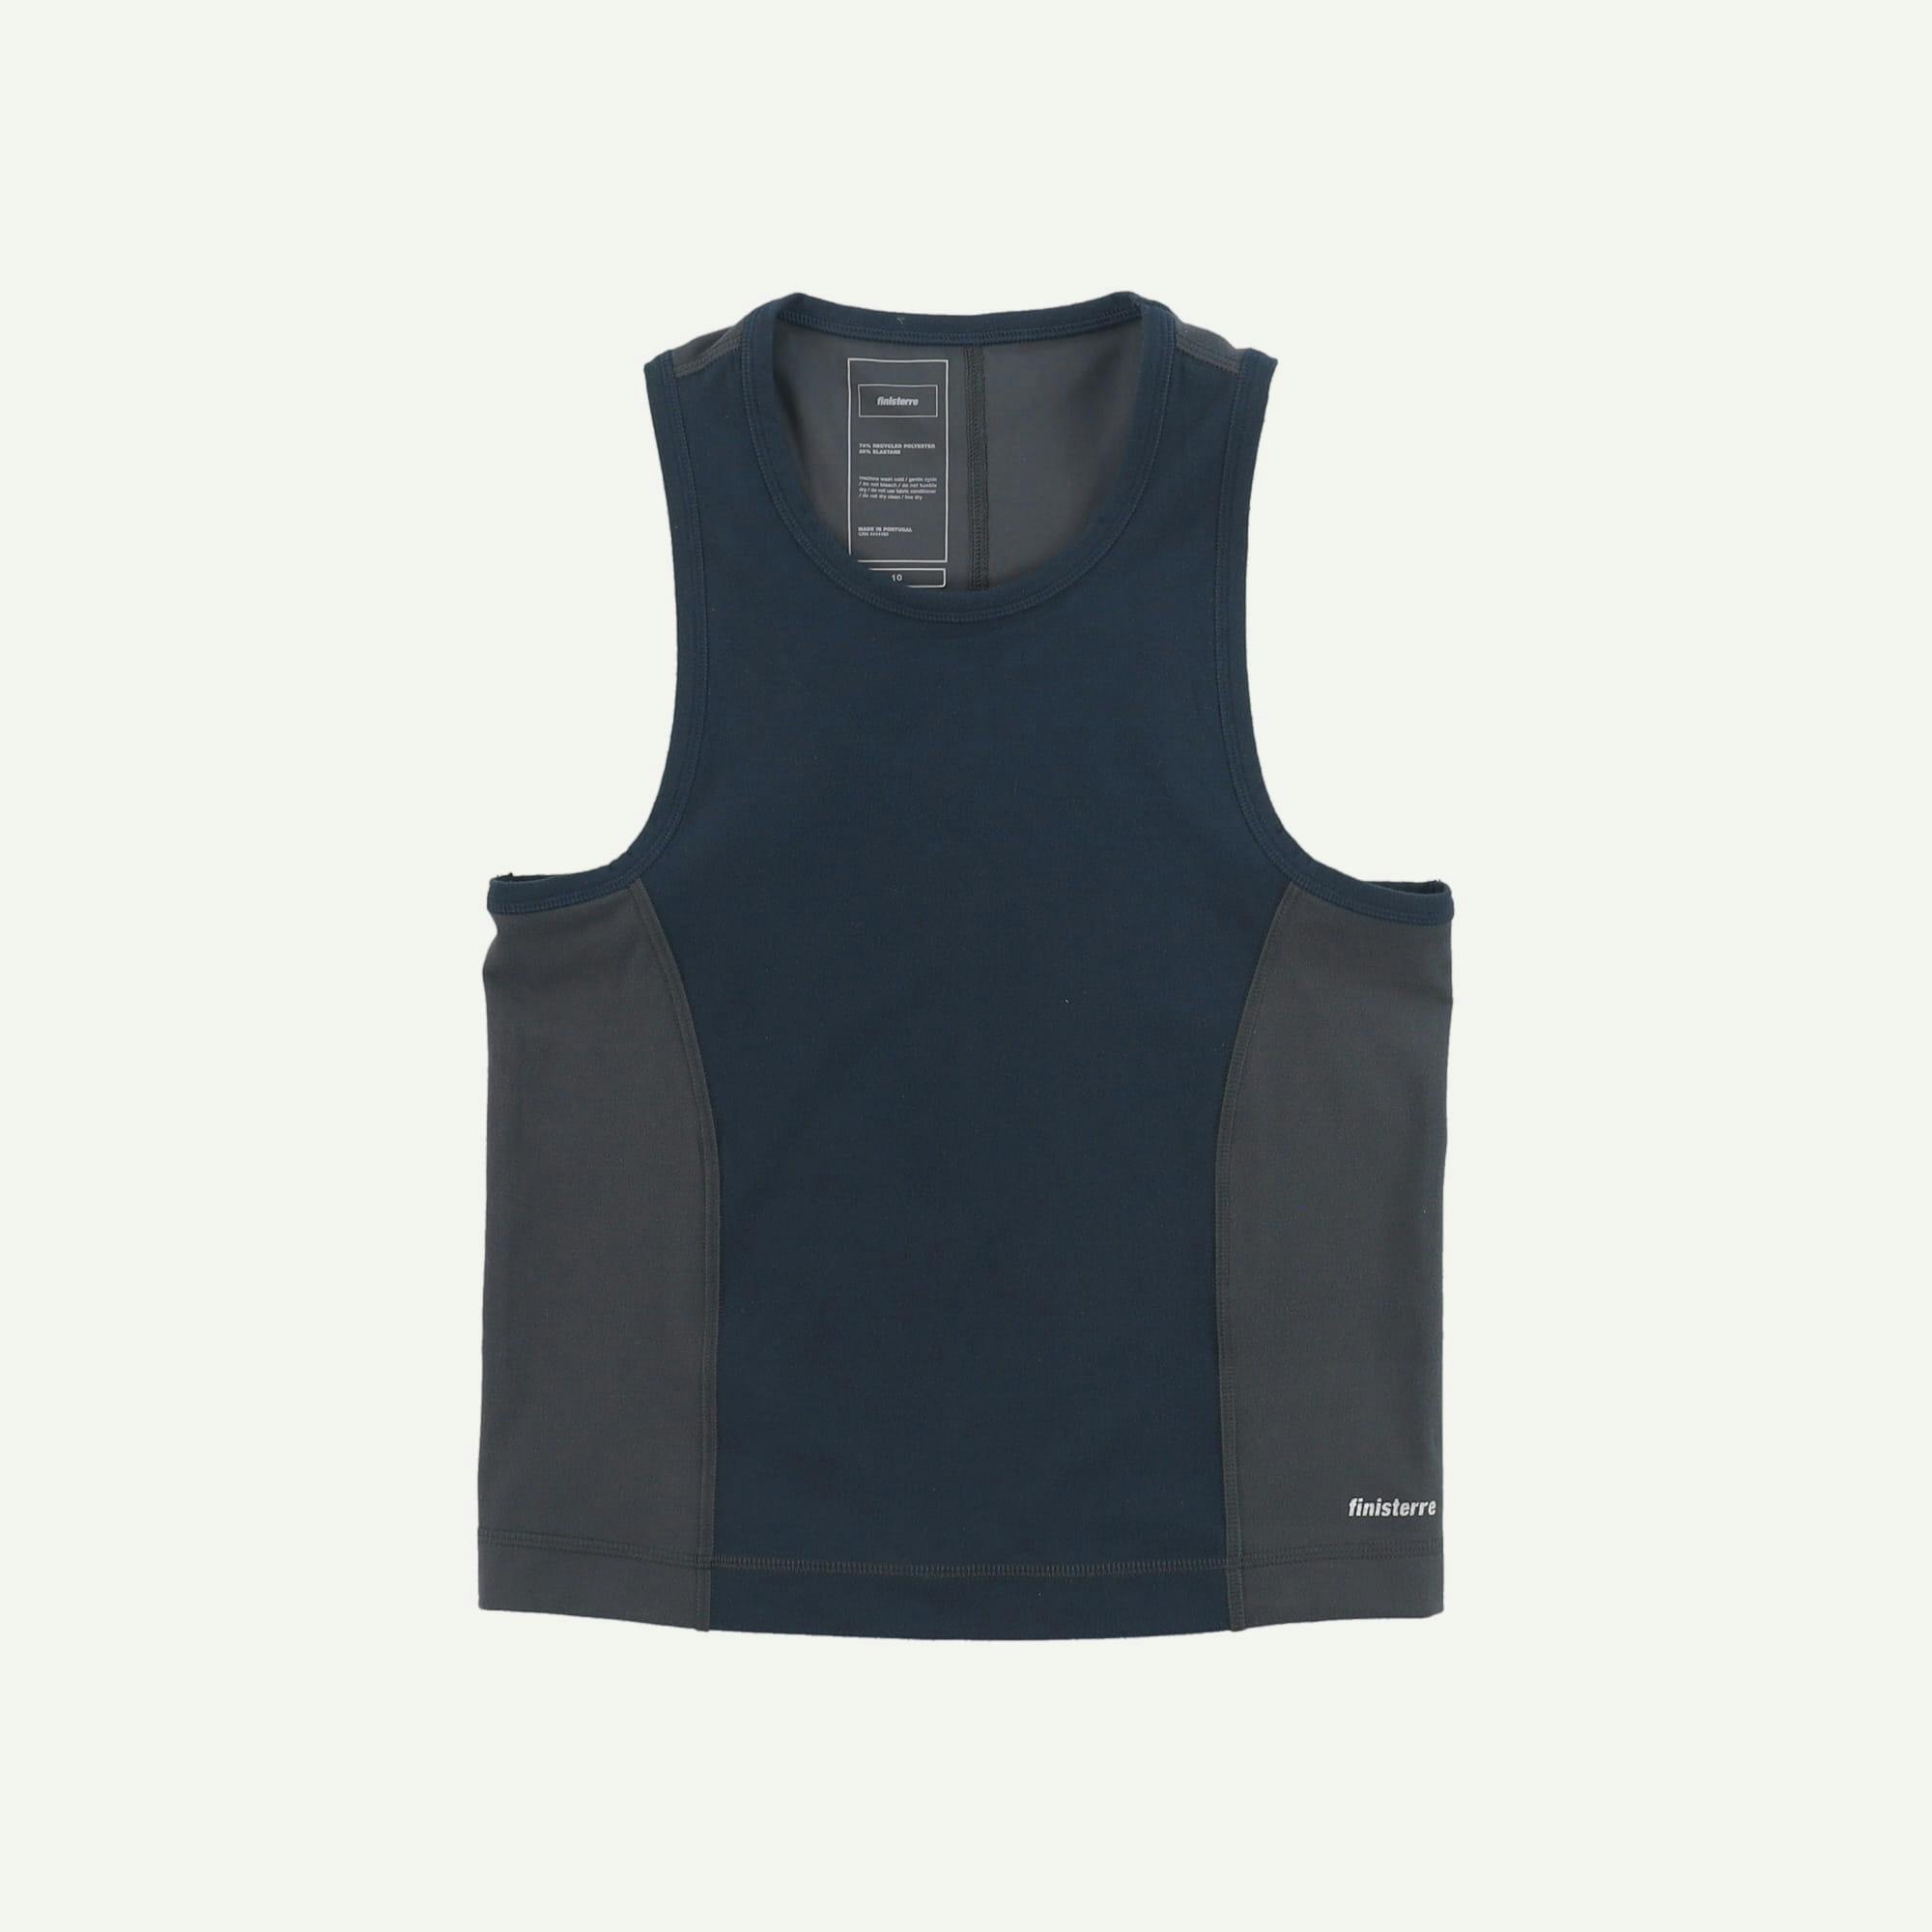 Finisterre As new Navy Top